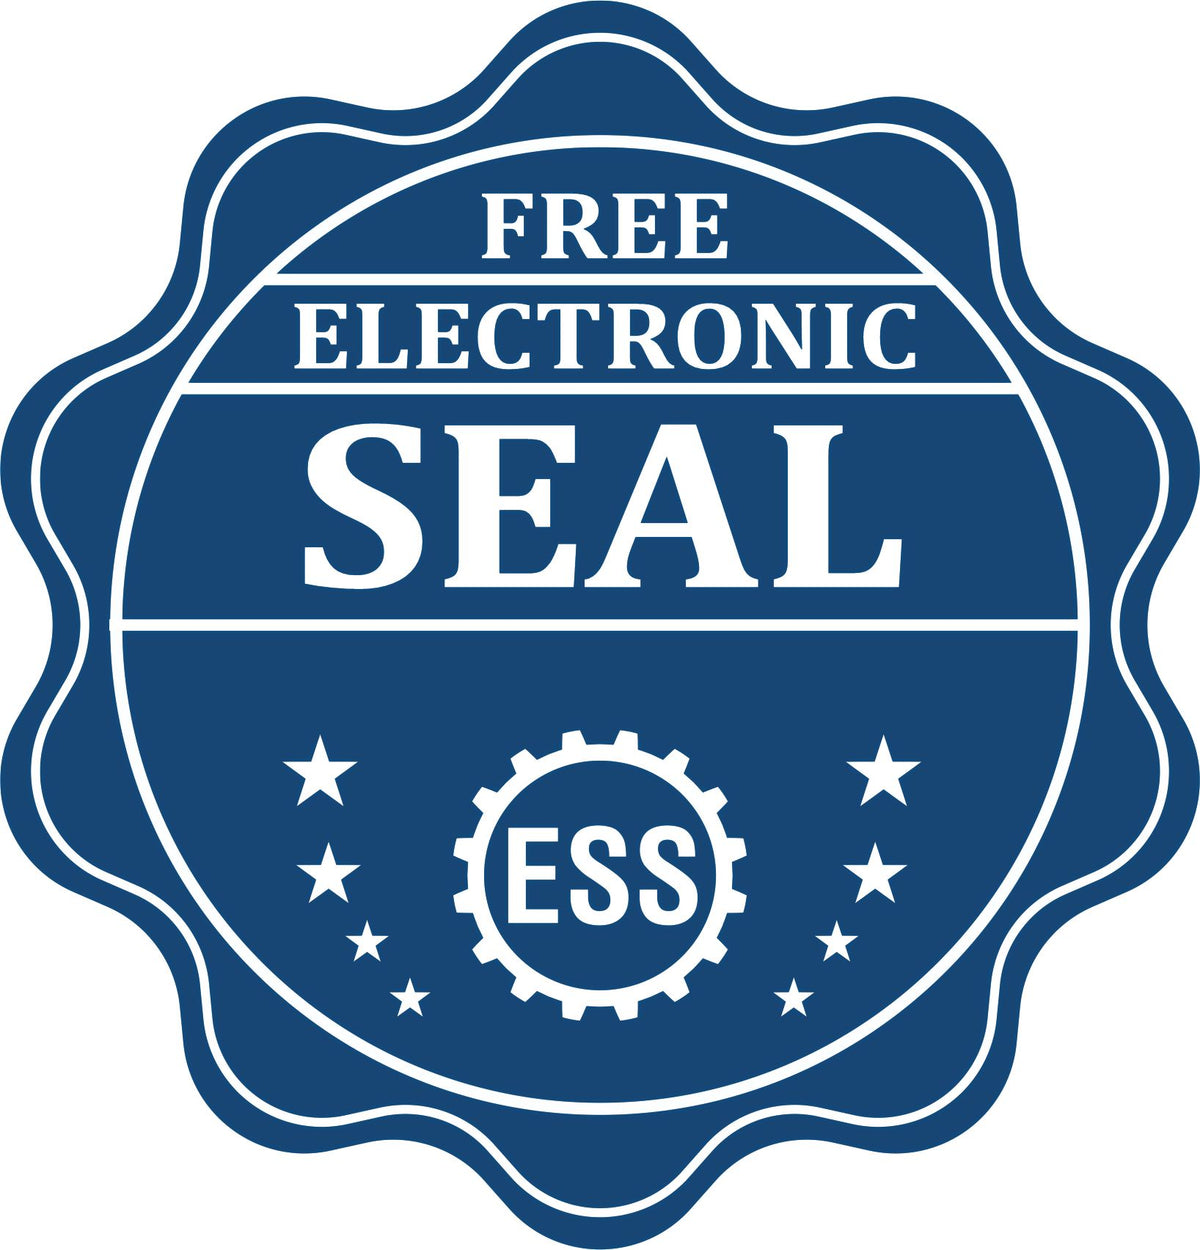 A badge showing a free electronic seal for the Soft Guam Professional Engineer Seal with stars and the ESS gear on the emblem.